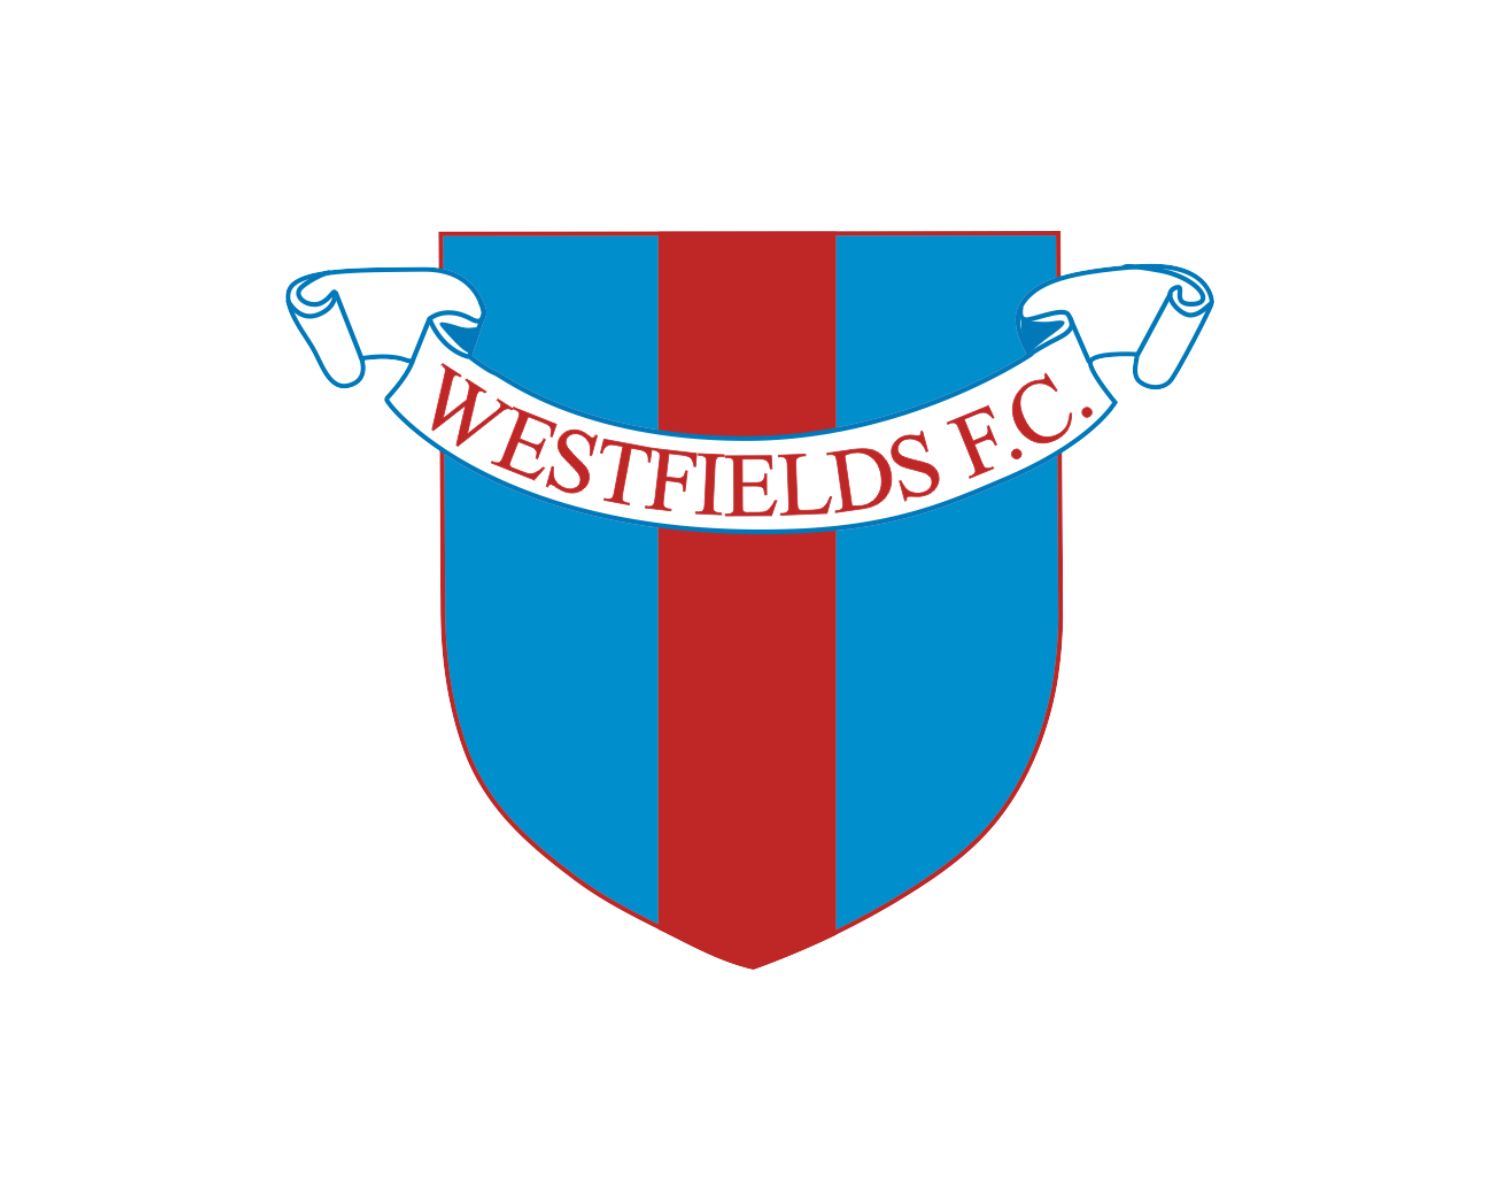 westfields-fc-20-football-club-facts